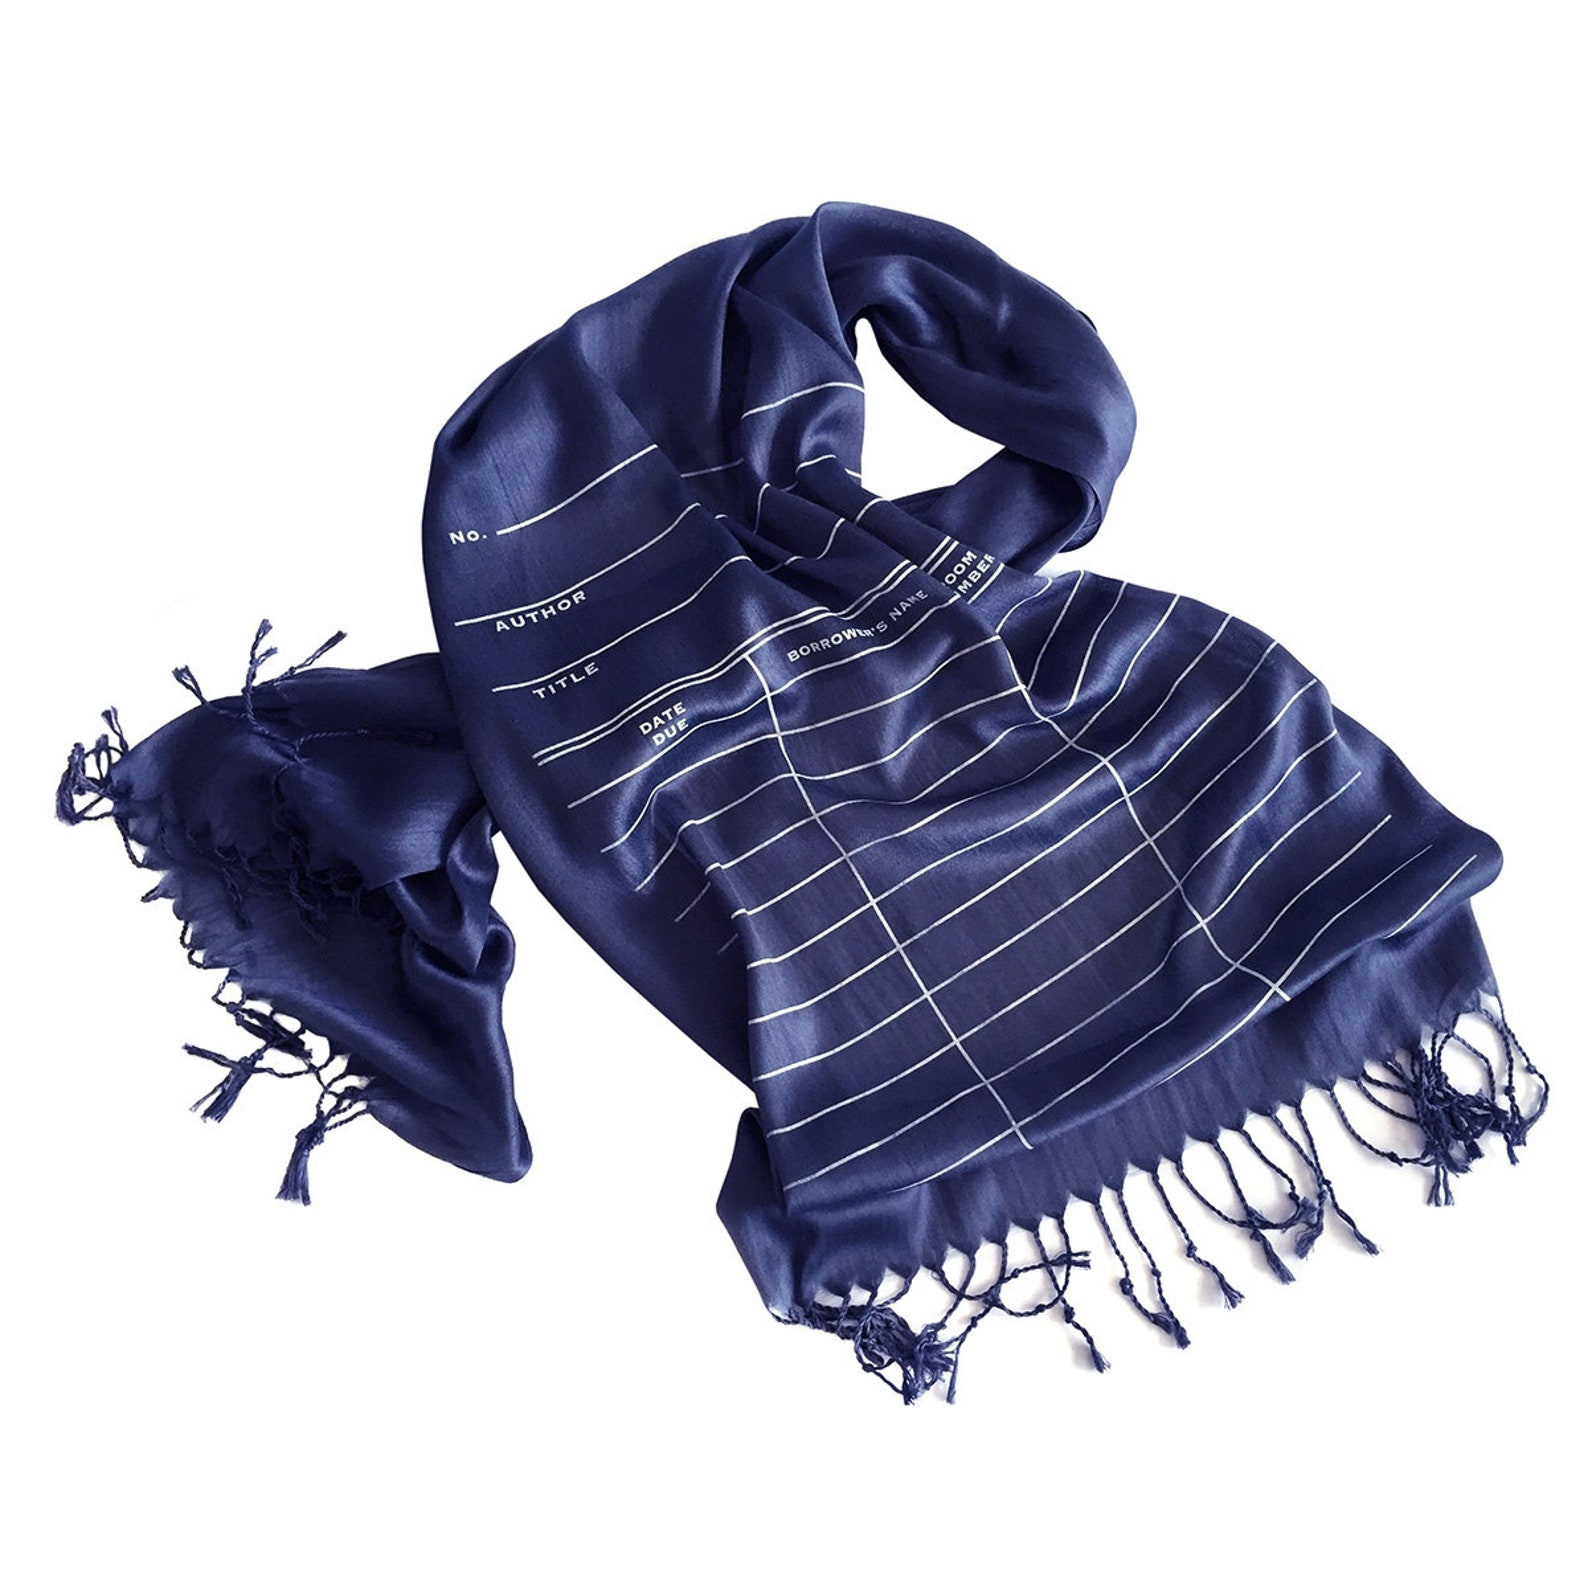 Dark blue scarf with white text and design of a due date card.